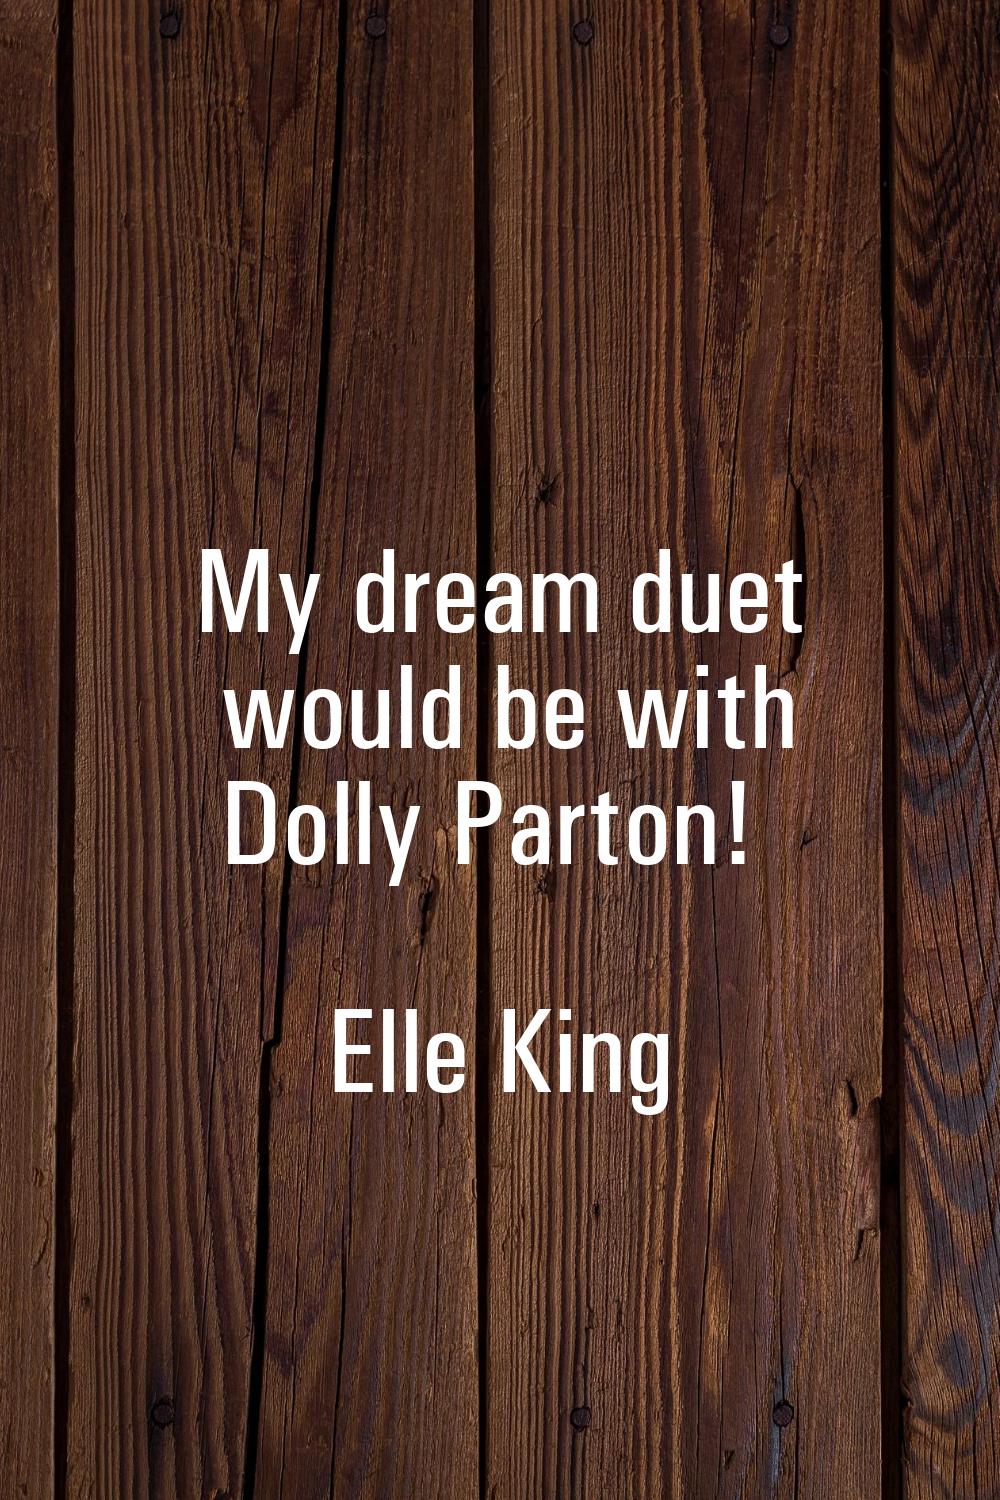 My dream duet would be with Dolly Parton!